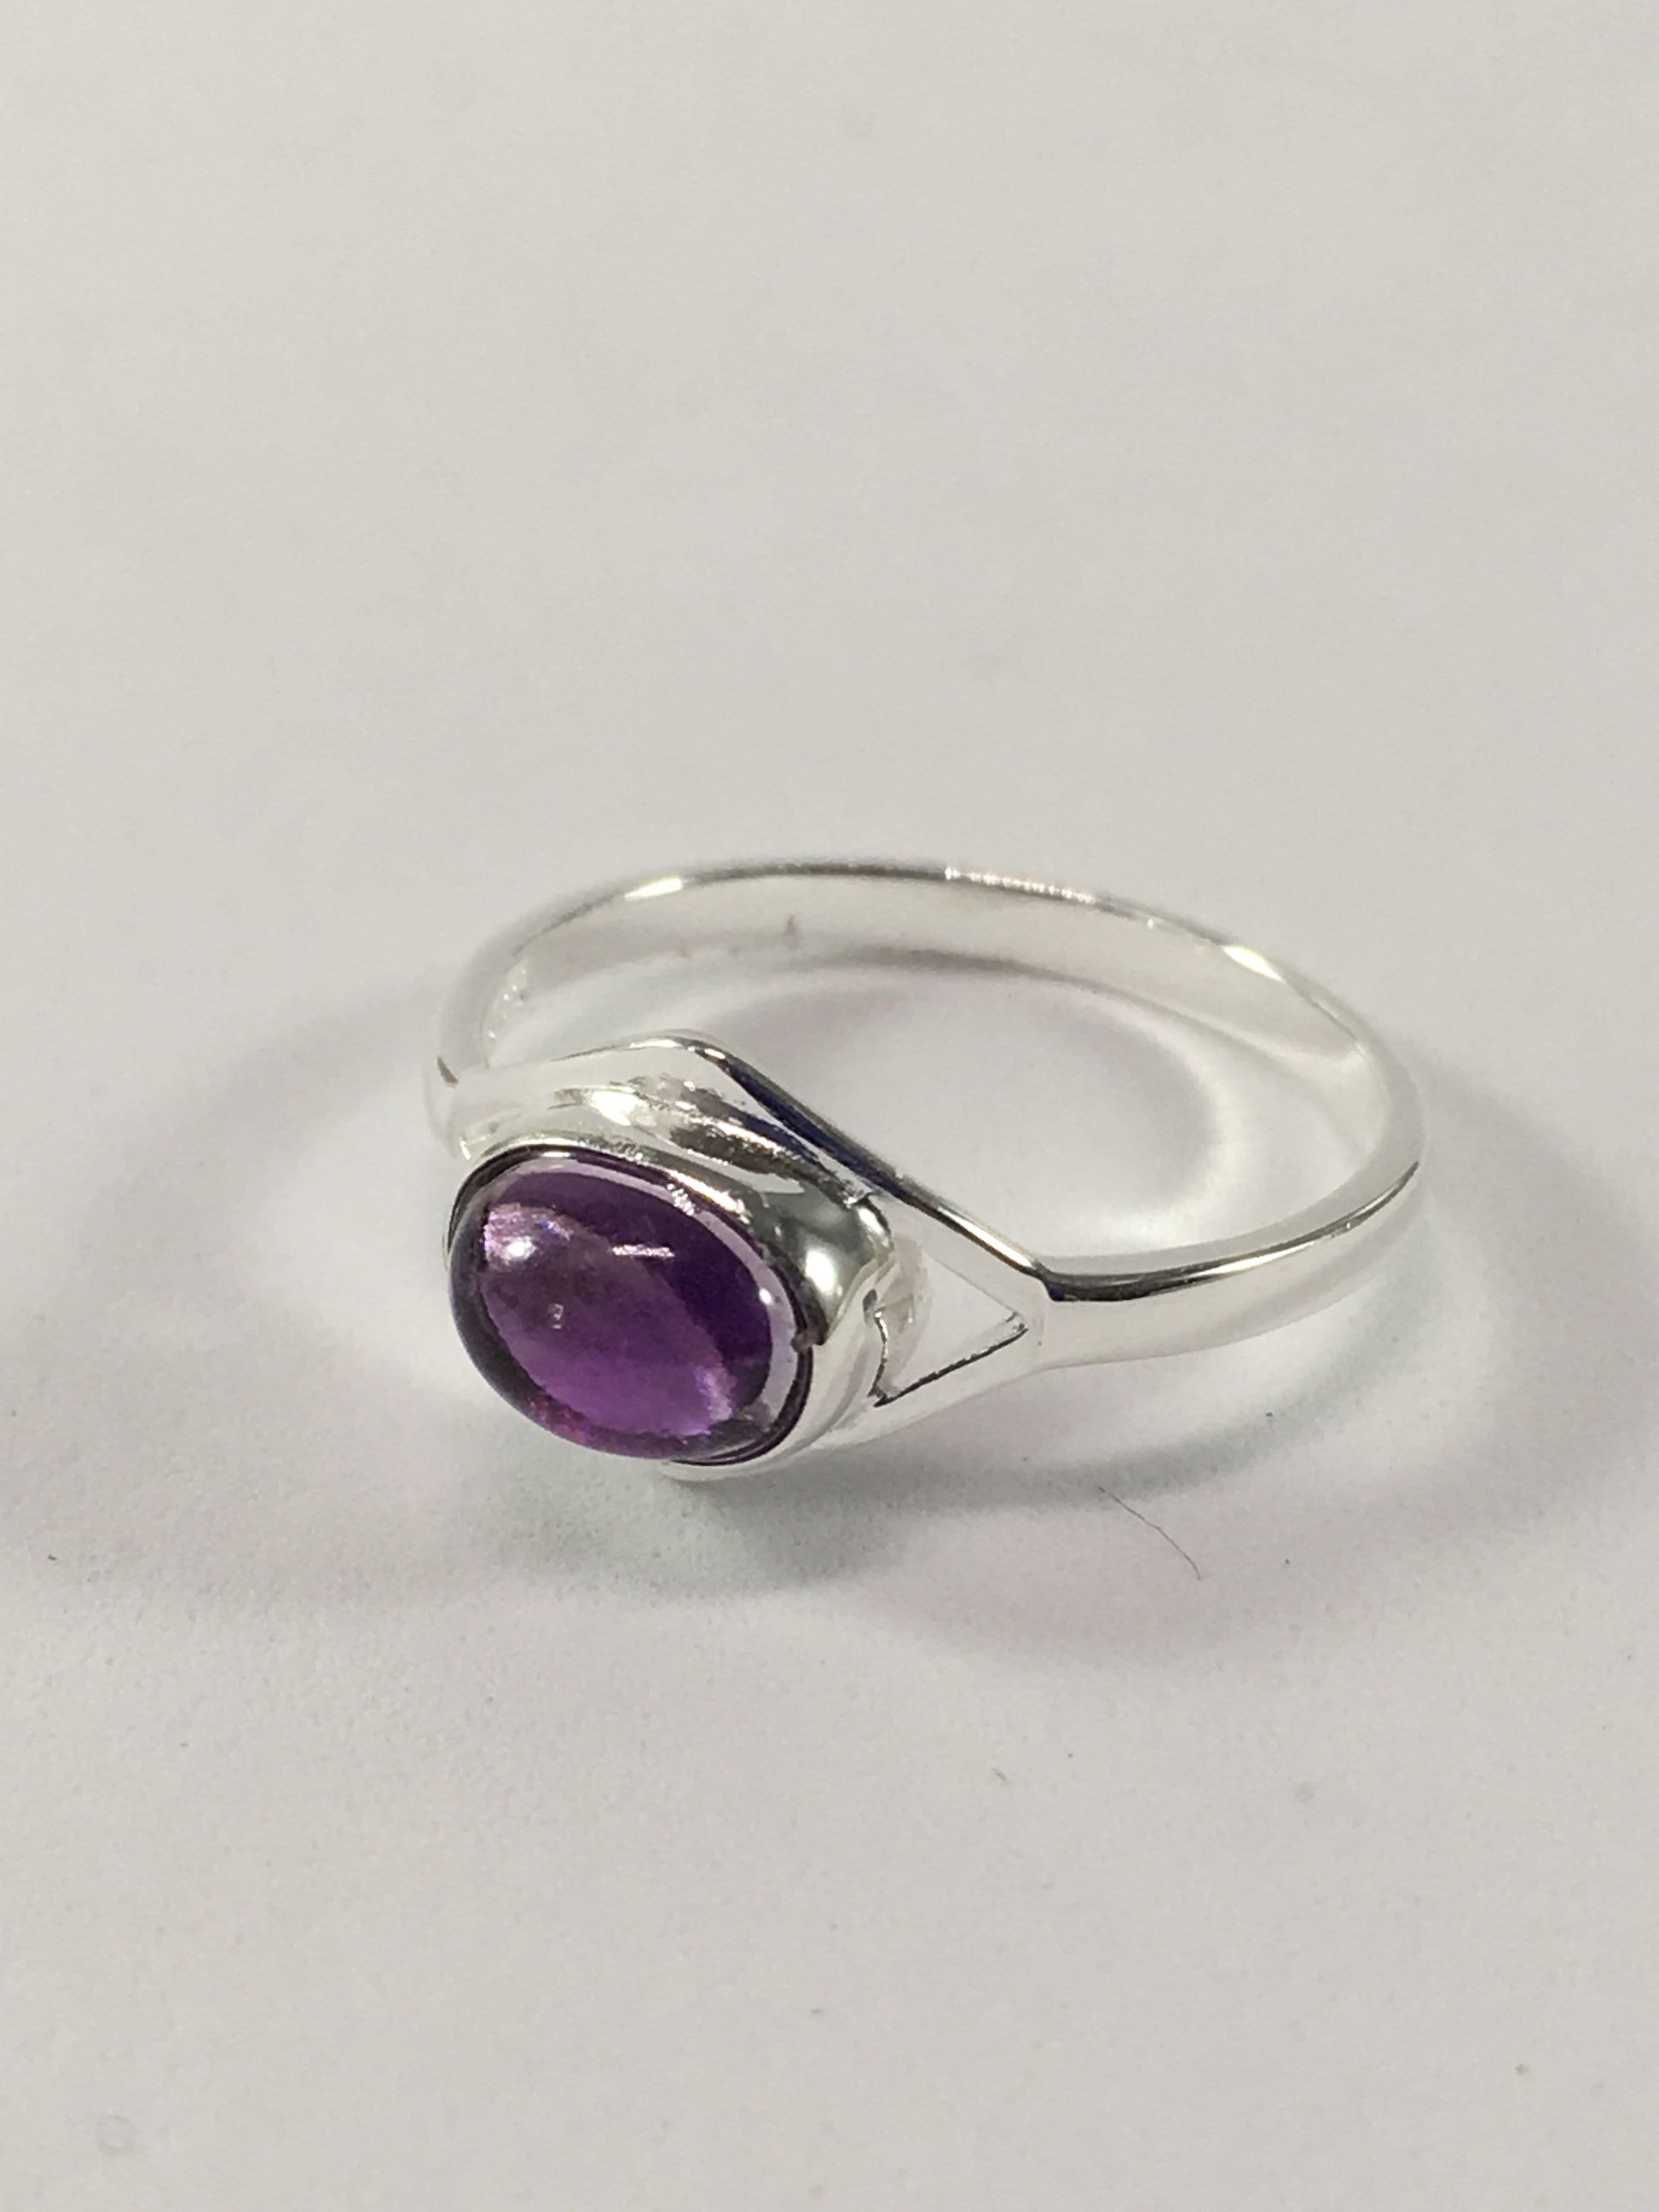 Oval Gemstone And Sterling Silver Ring